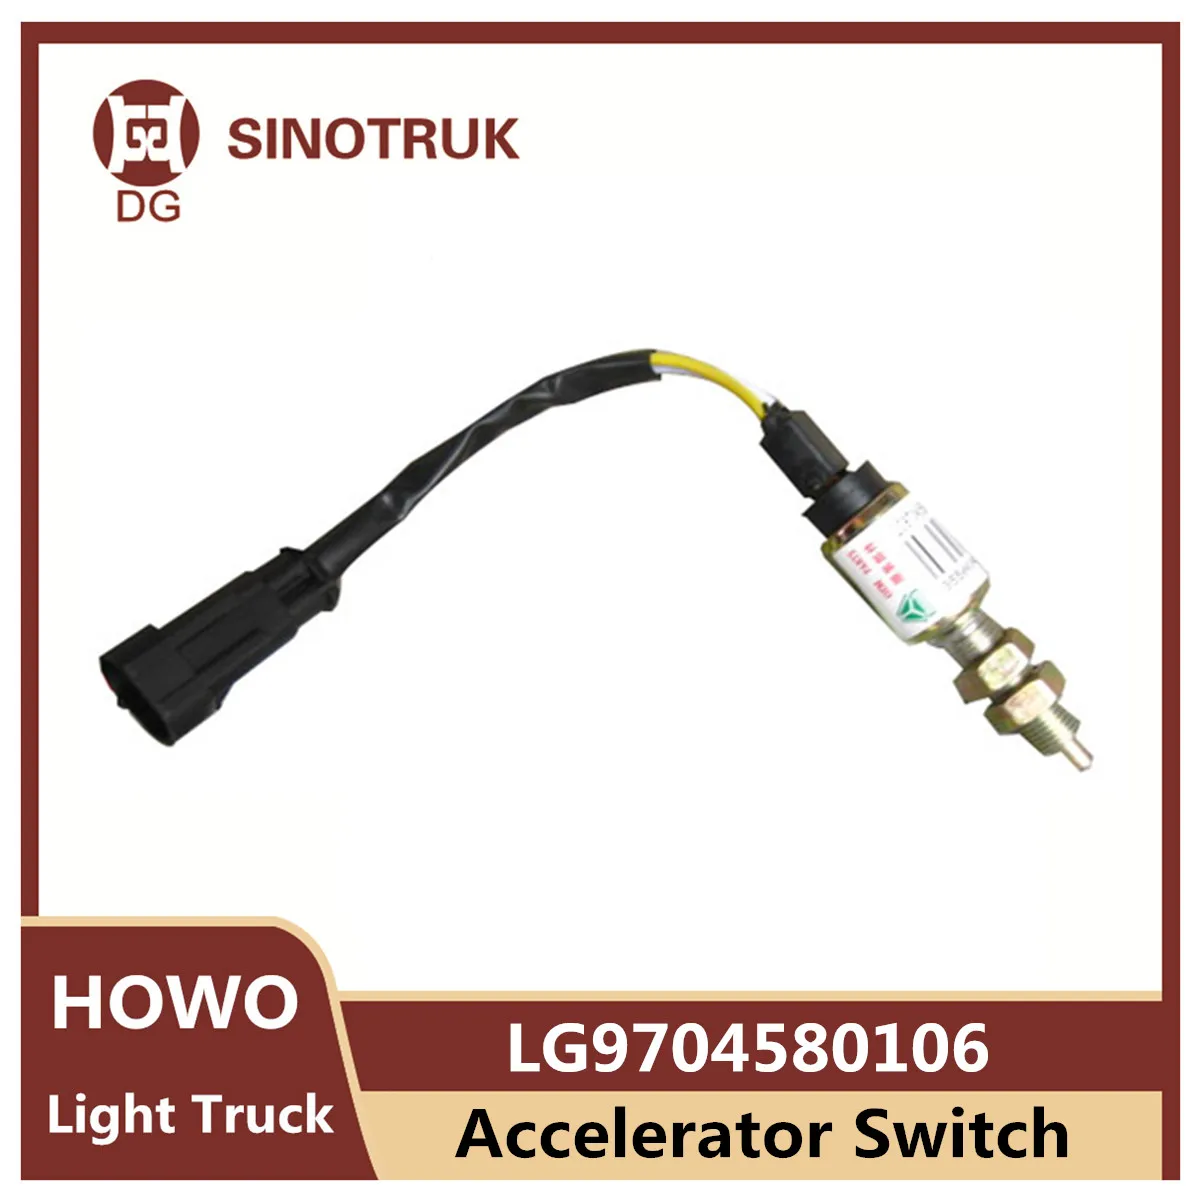 Accelerator Switch LG9704580106 for Sinotruk Howo Light Truck Clutch Switch Original Auto Truck Parts 812w61701 0197 front cabin handle for sinotruk sitrak c7h howo t5g tx hood lock face inner buckle opening switch truck parts